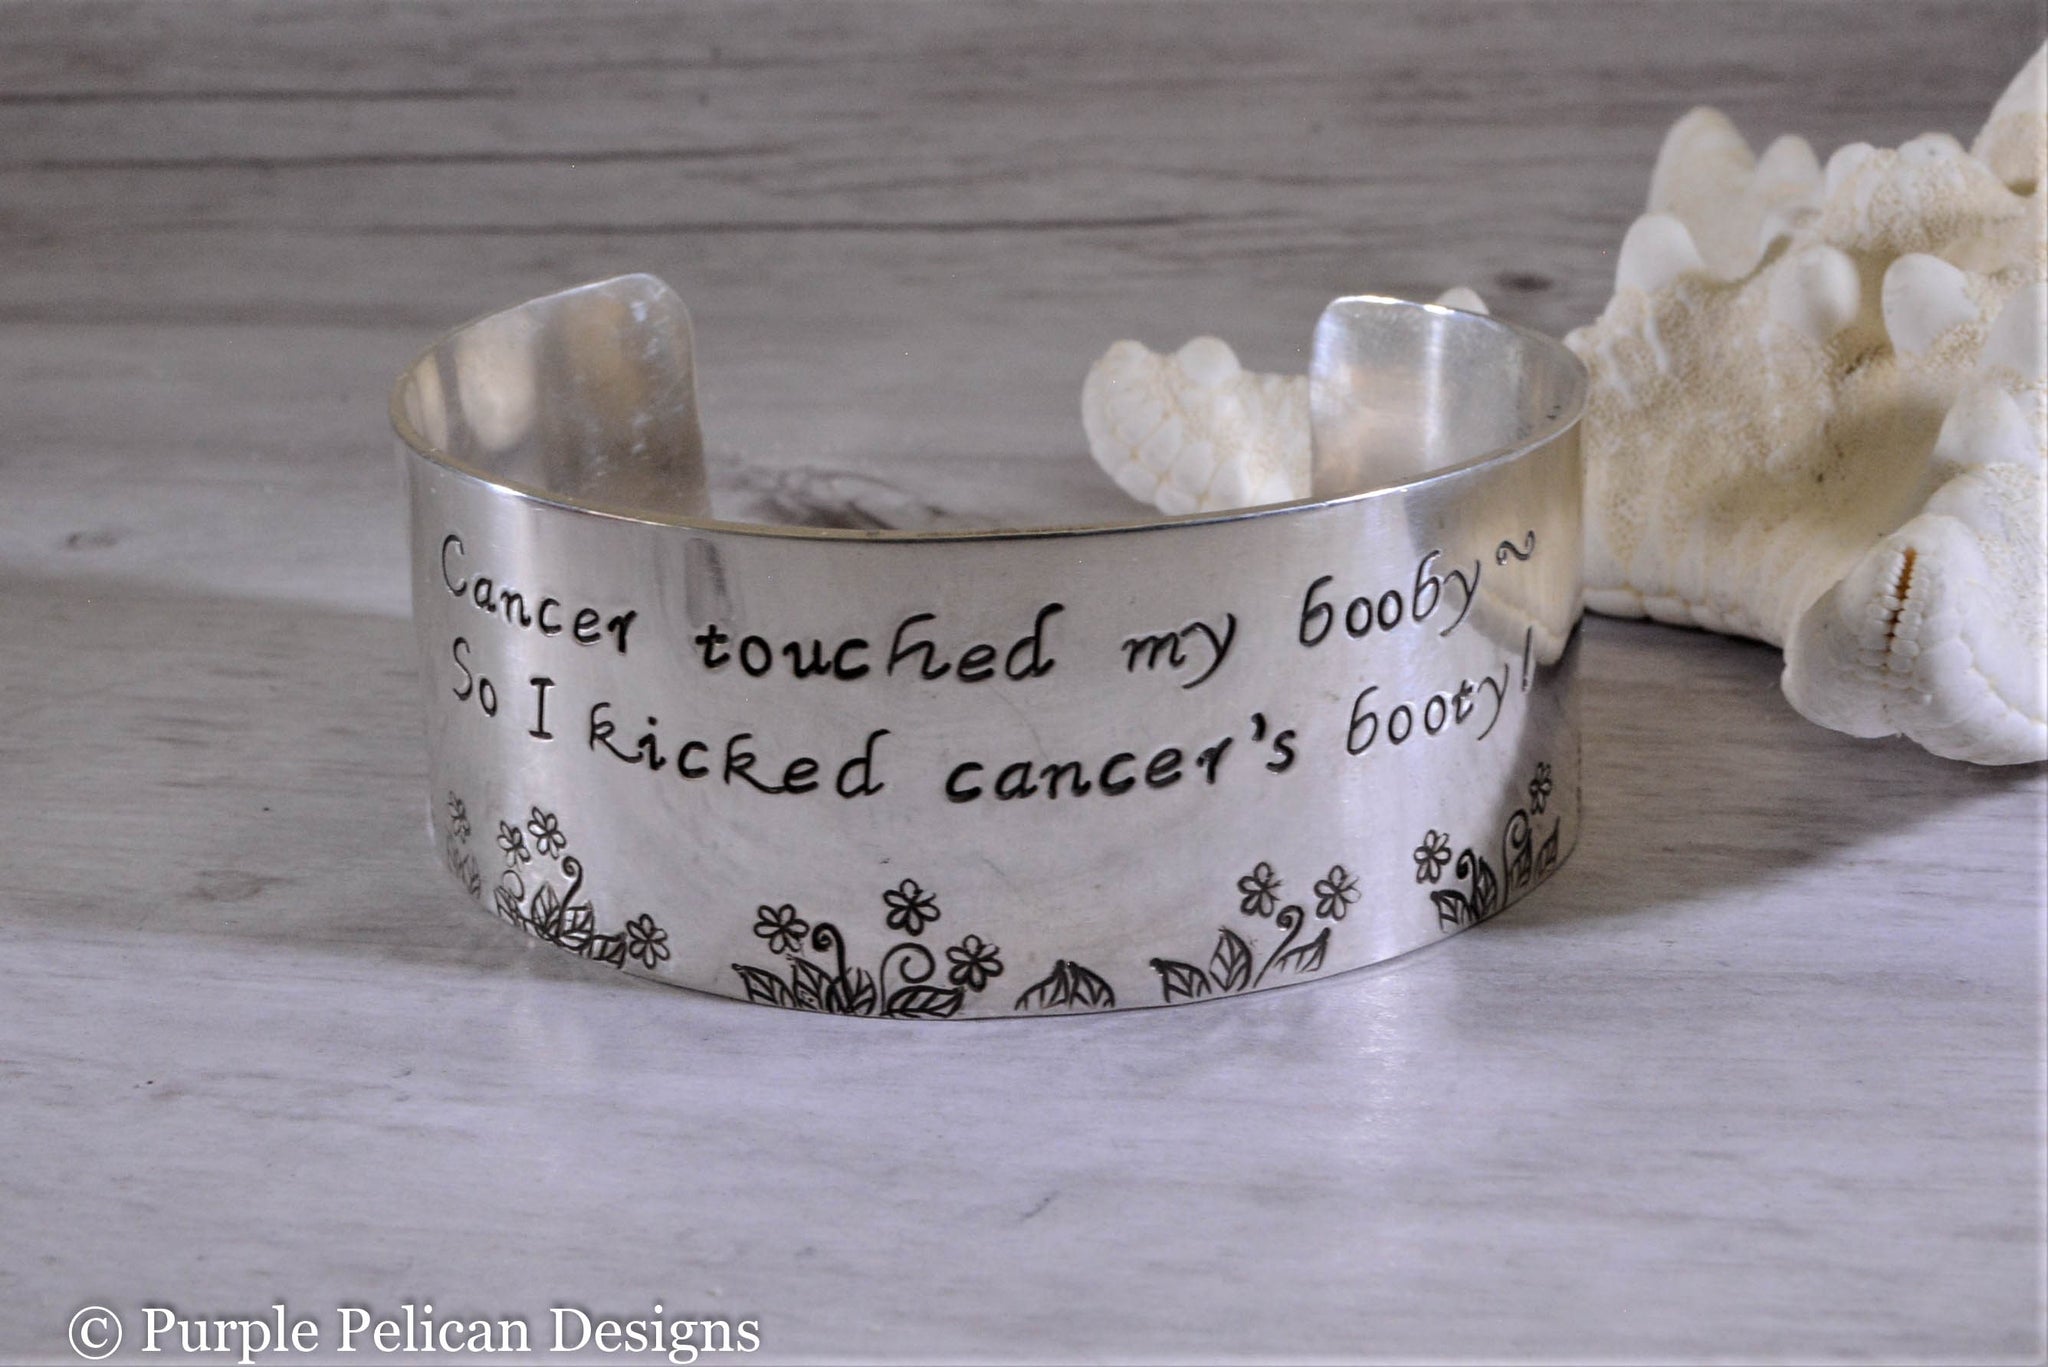 Breast Cancer survivor bracelet - Cancer touched my booby - Purple  Pelican Designs